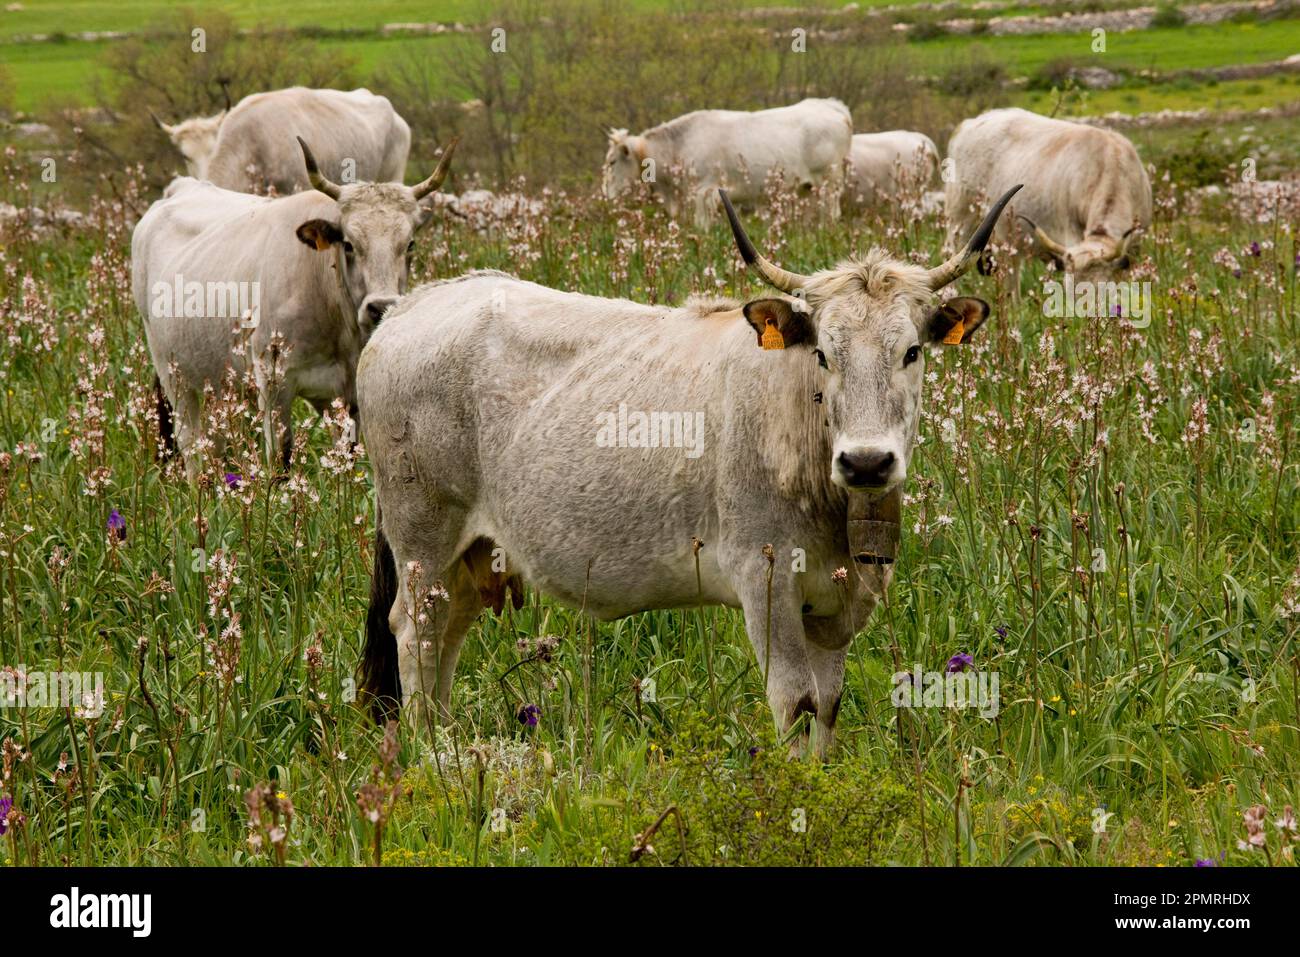 Domestic cattle, Podolica cows, herd with bells, grazing on walled pasture, Gargano peninsula, Apulia, Italy Stock Photo